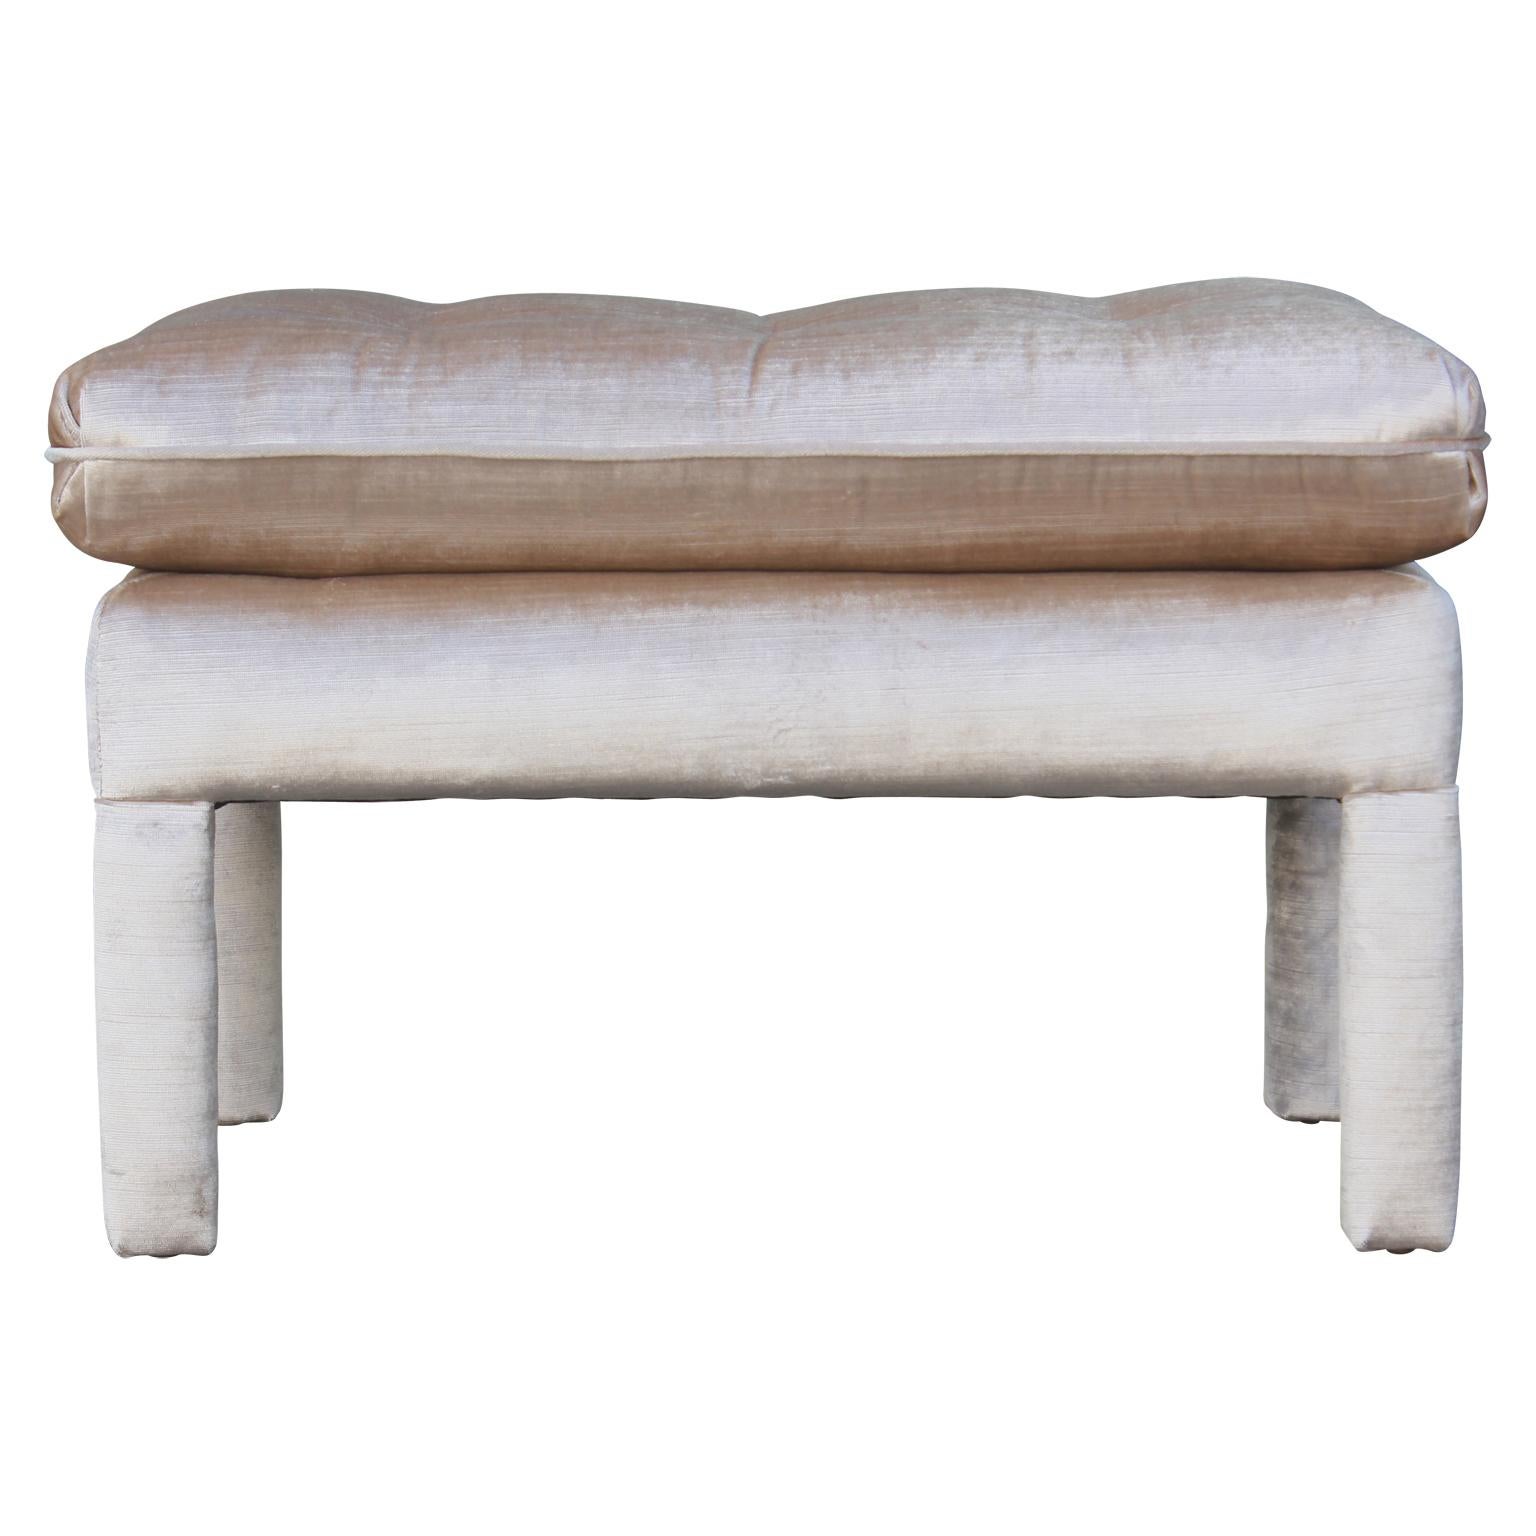 Pair of gorgeous Parsons style stools or ottomans with pillow tops and freshly upholstered in a lush neutral velvet.
 